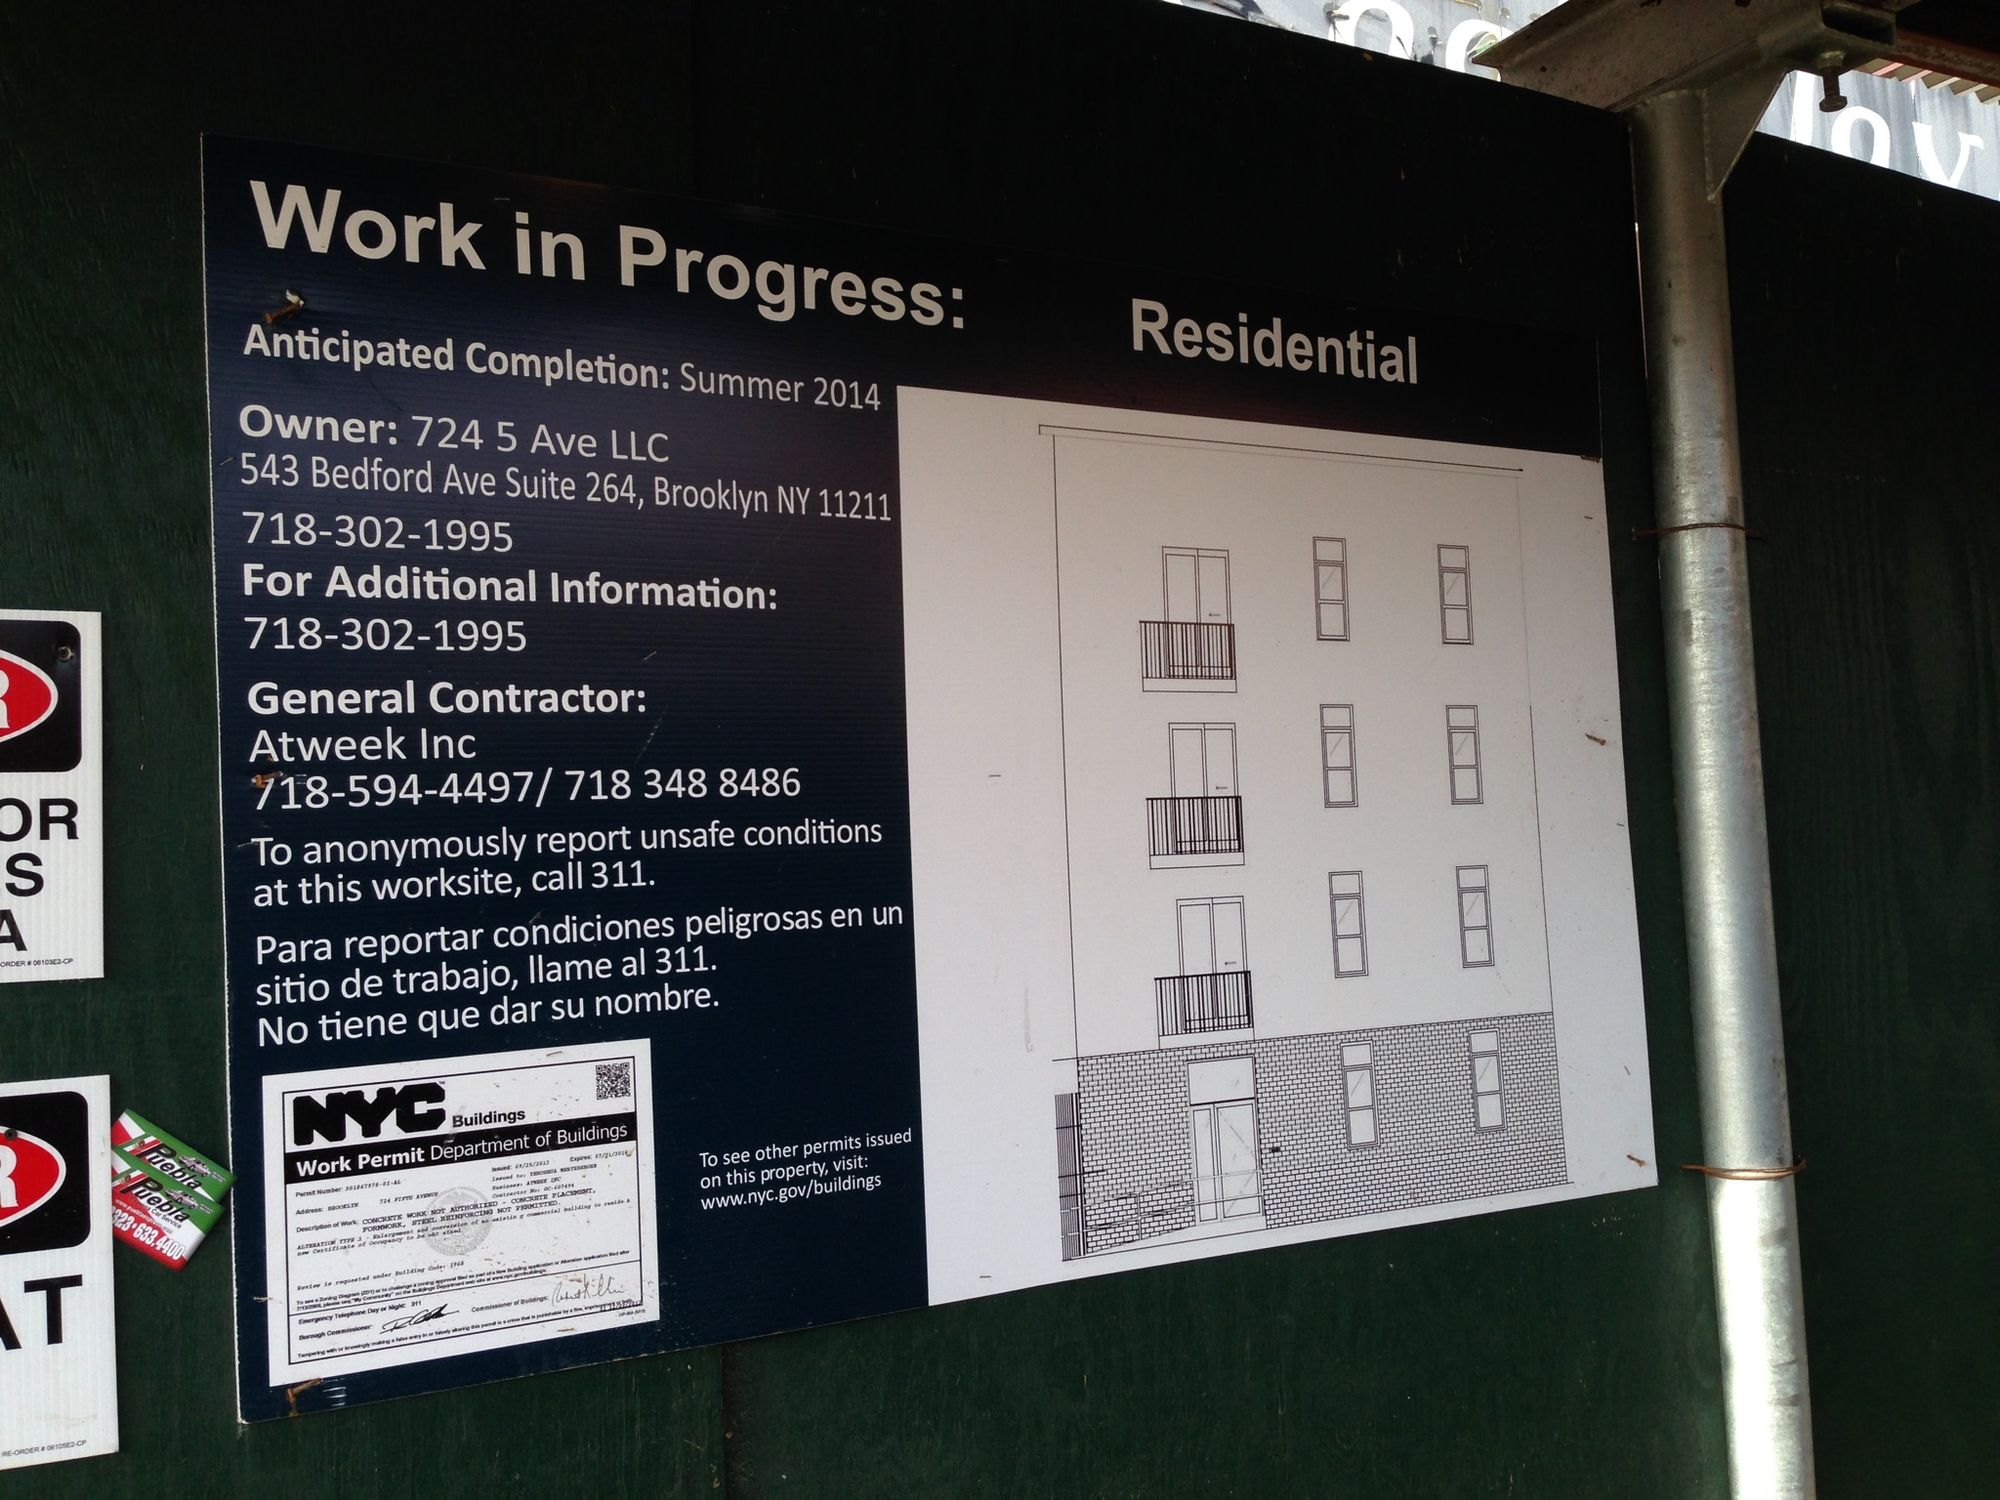 New Residential Building Coming To 5th Avenue & 23rd Street